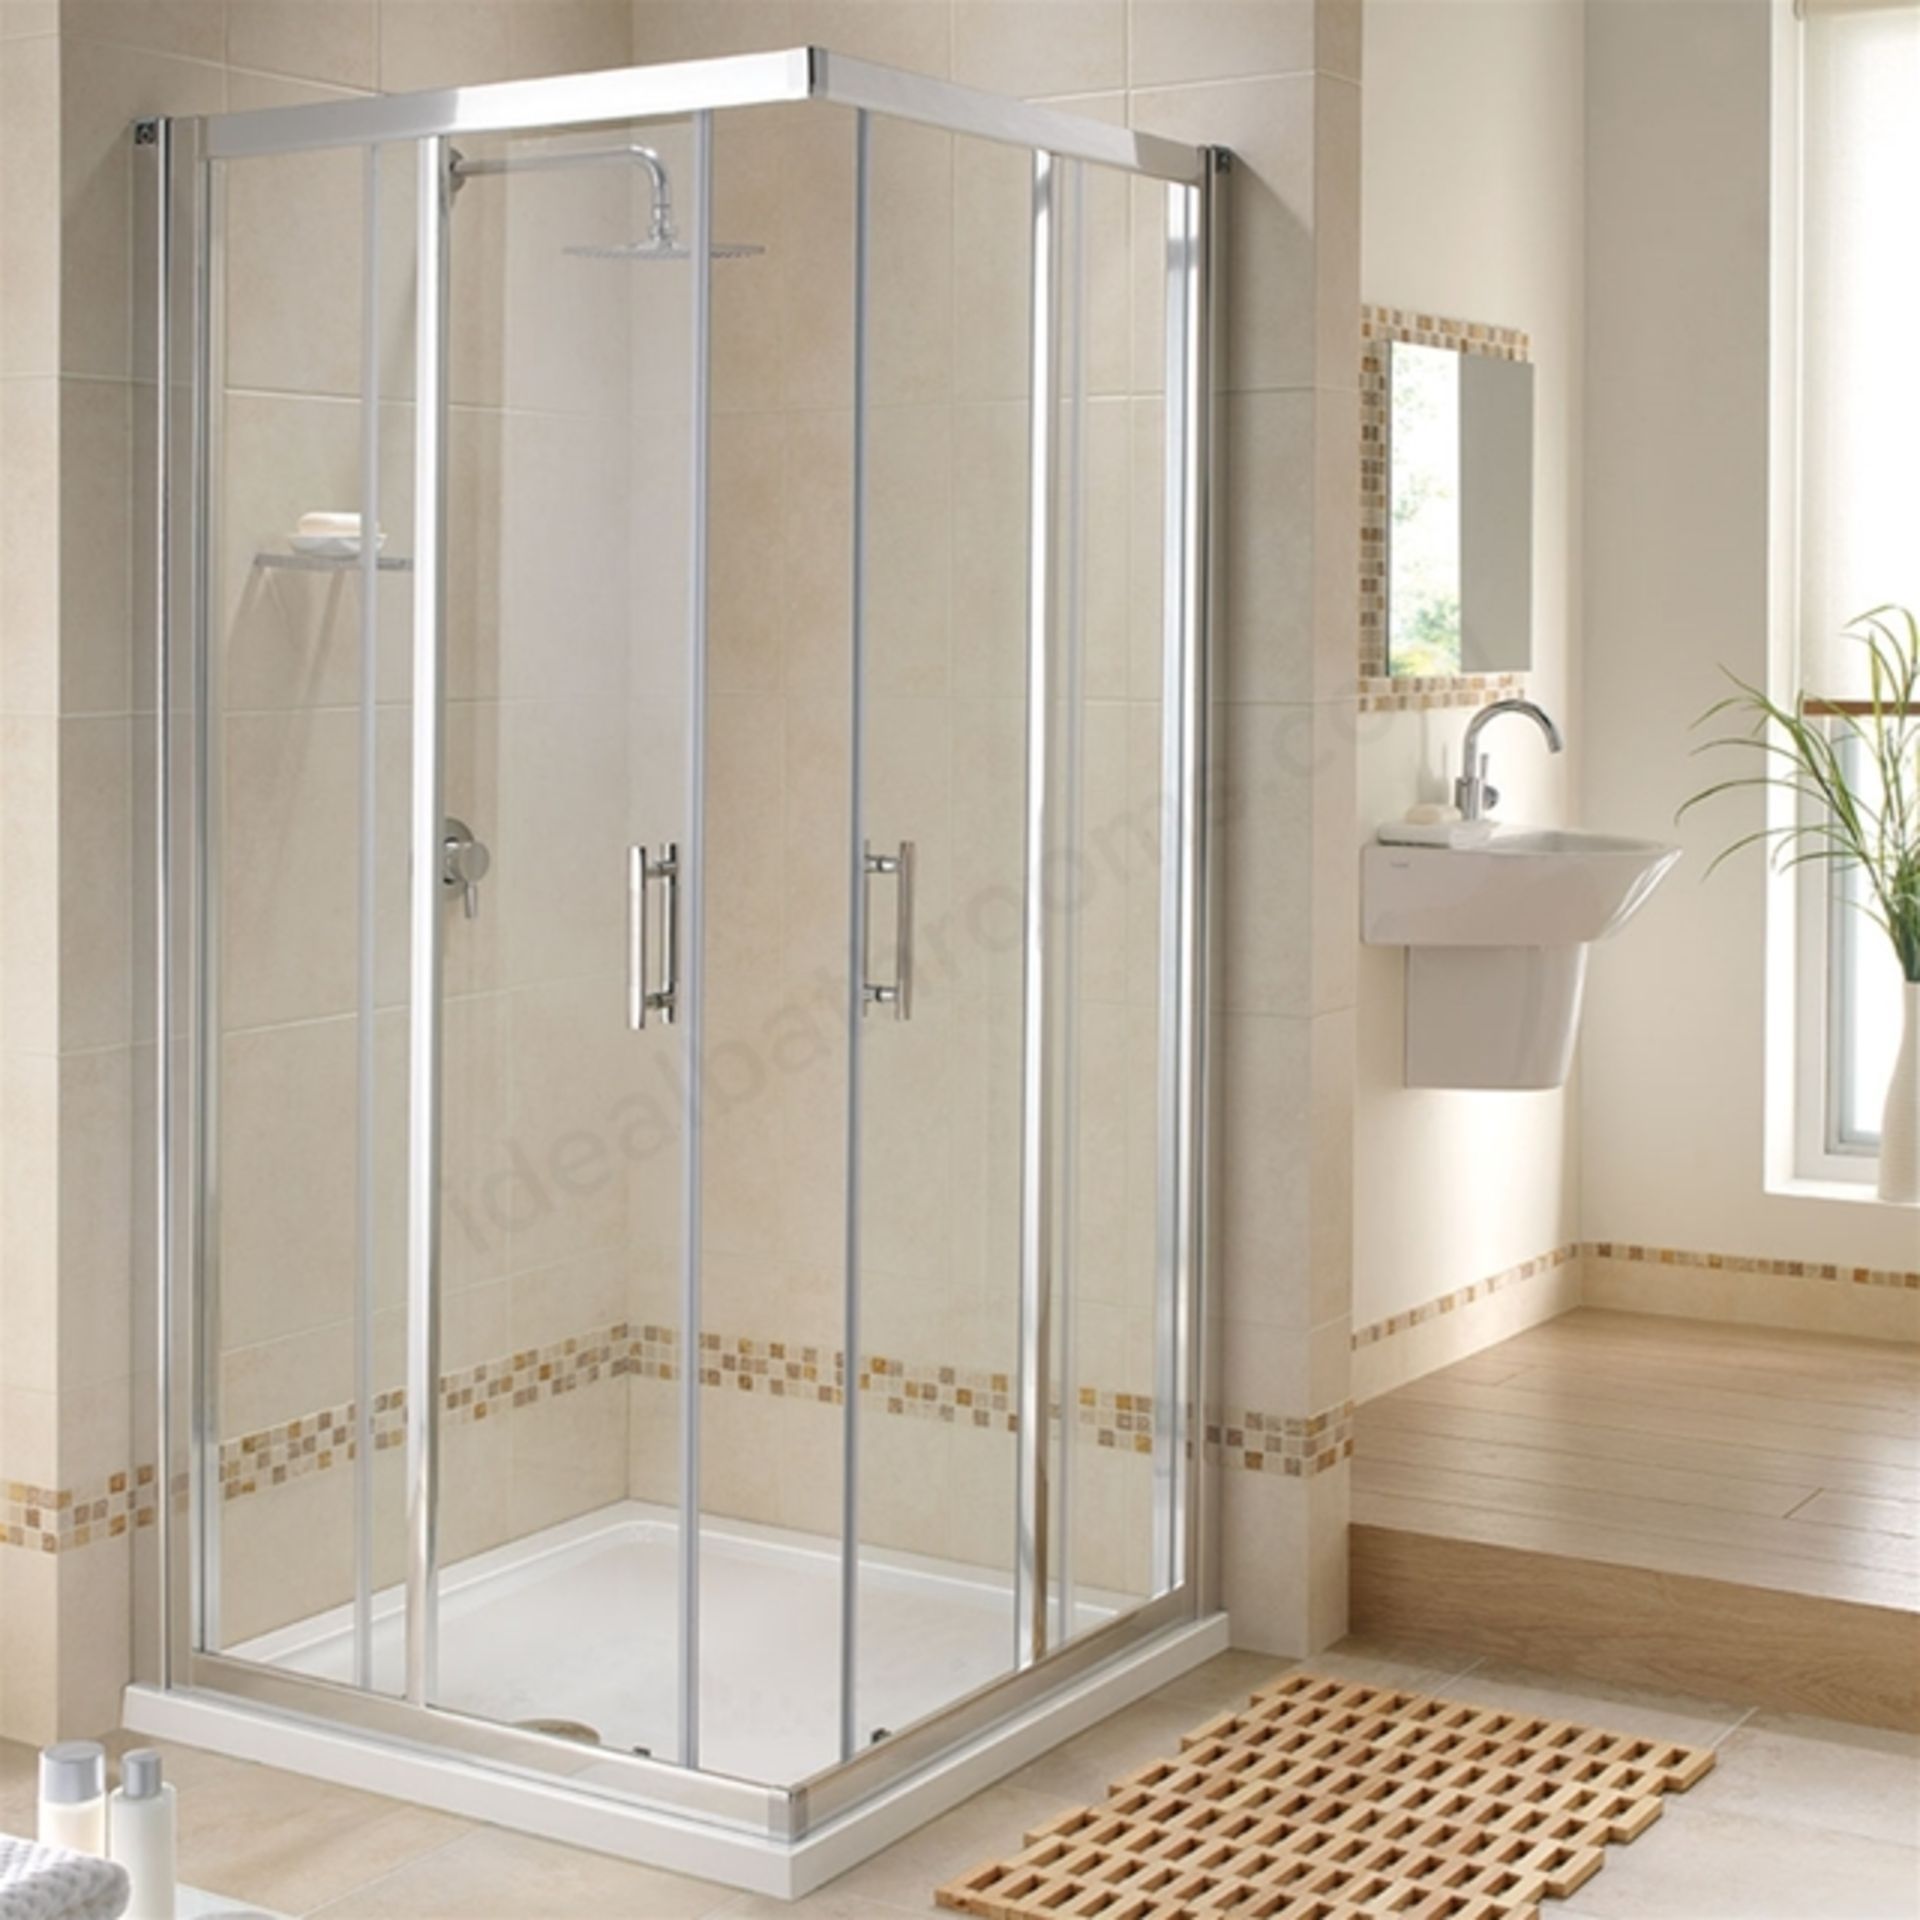 New (T196) 800x800mm Sliding Corner Entry Enclosure; 6mm Glass. RRP £739.99. Whatever Sort Of... - Image 2 of 2